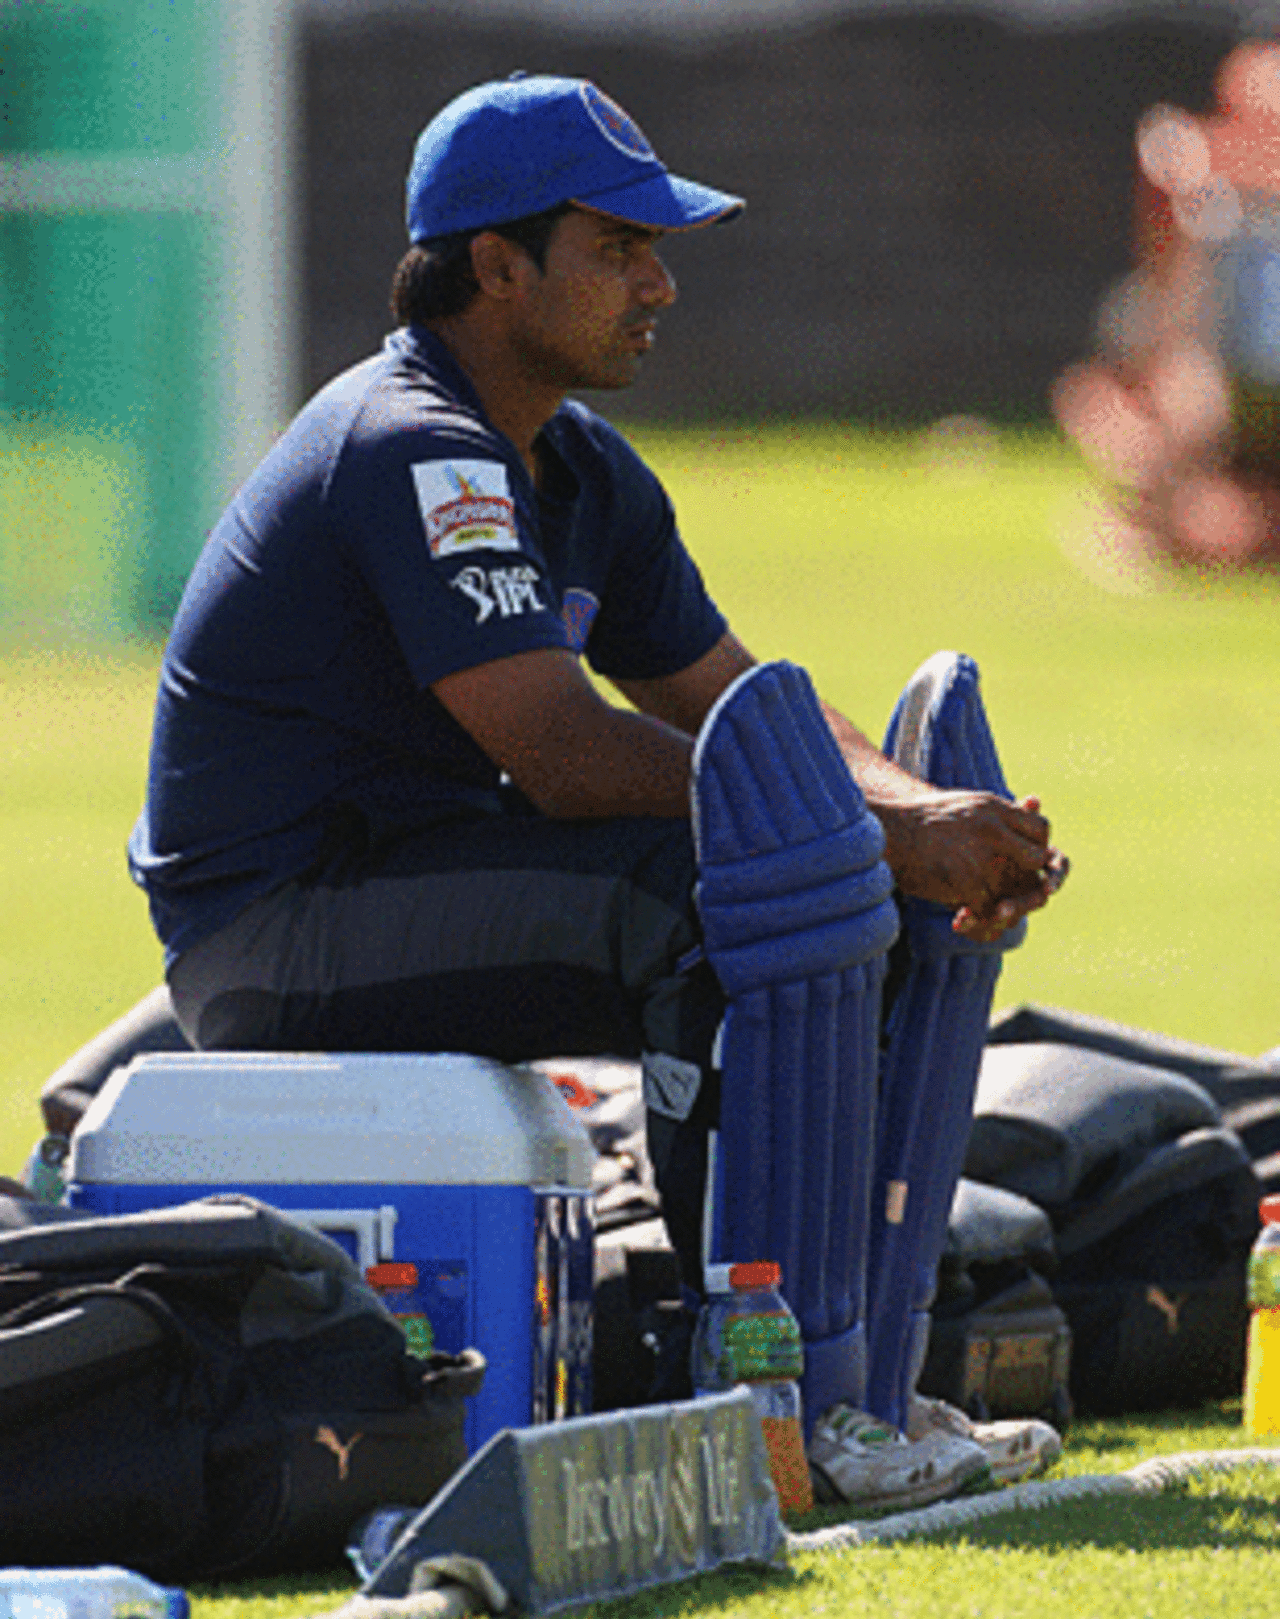 Siddharth Chitnis waits for his turn to bat at the nets, Cape Town, April 15, 2009